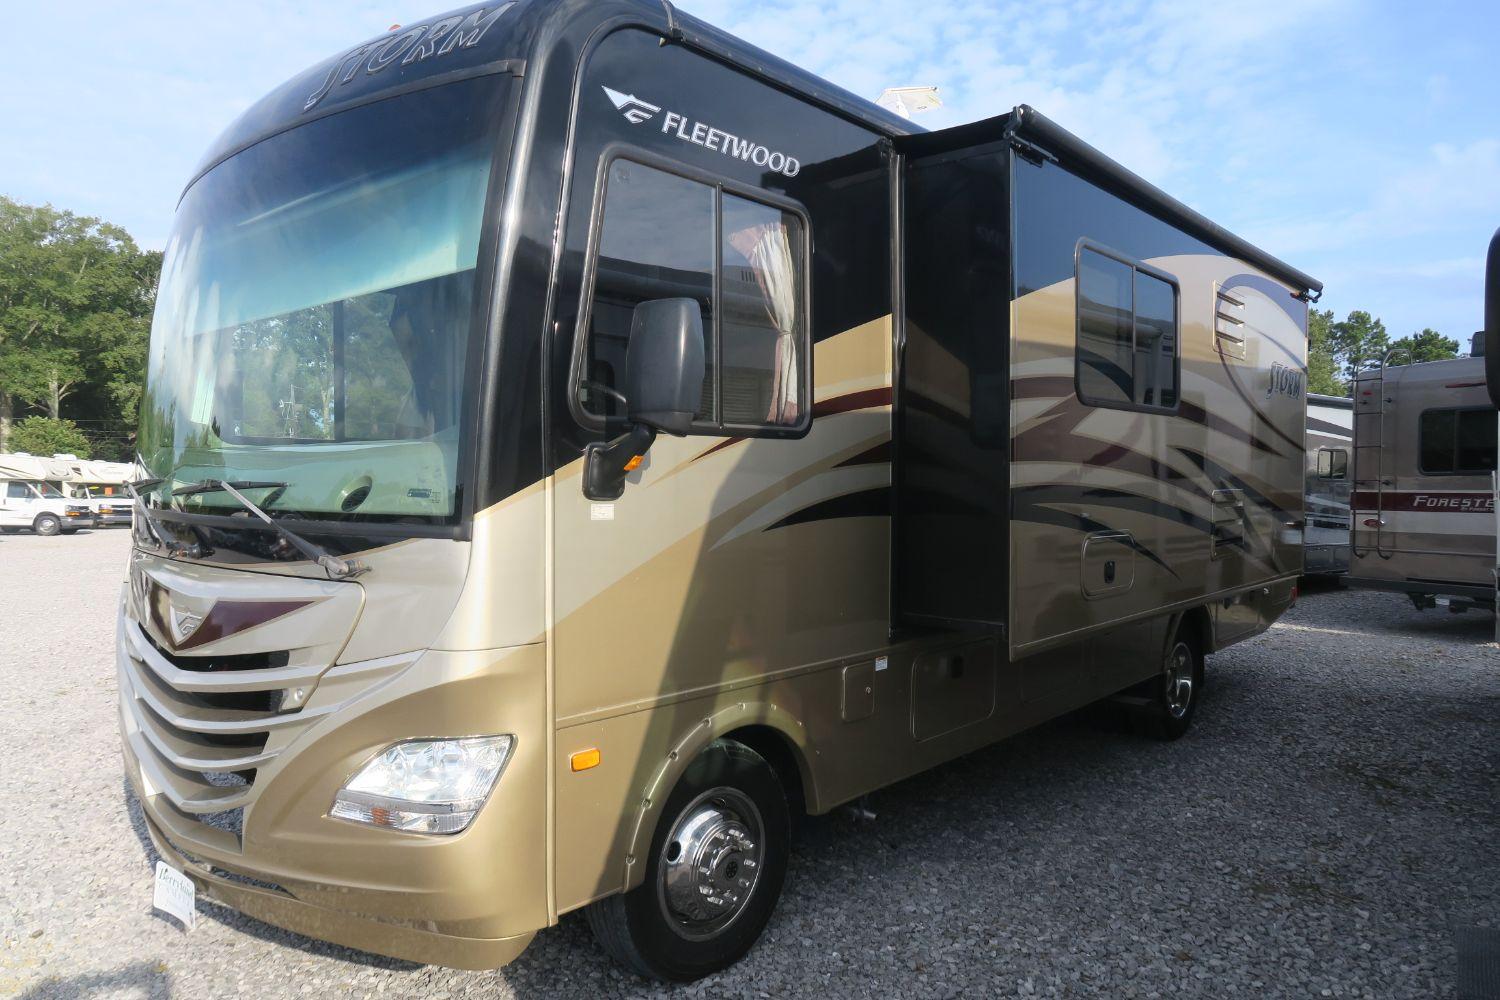 USED 2014 STORM 28F - Overview | Berryland Campers